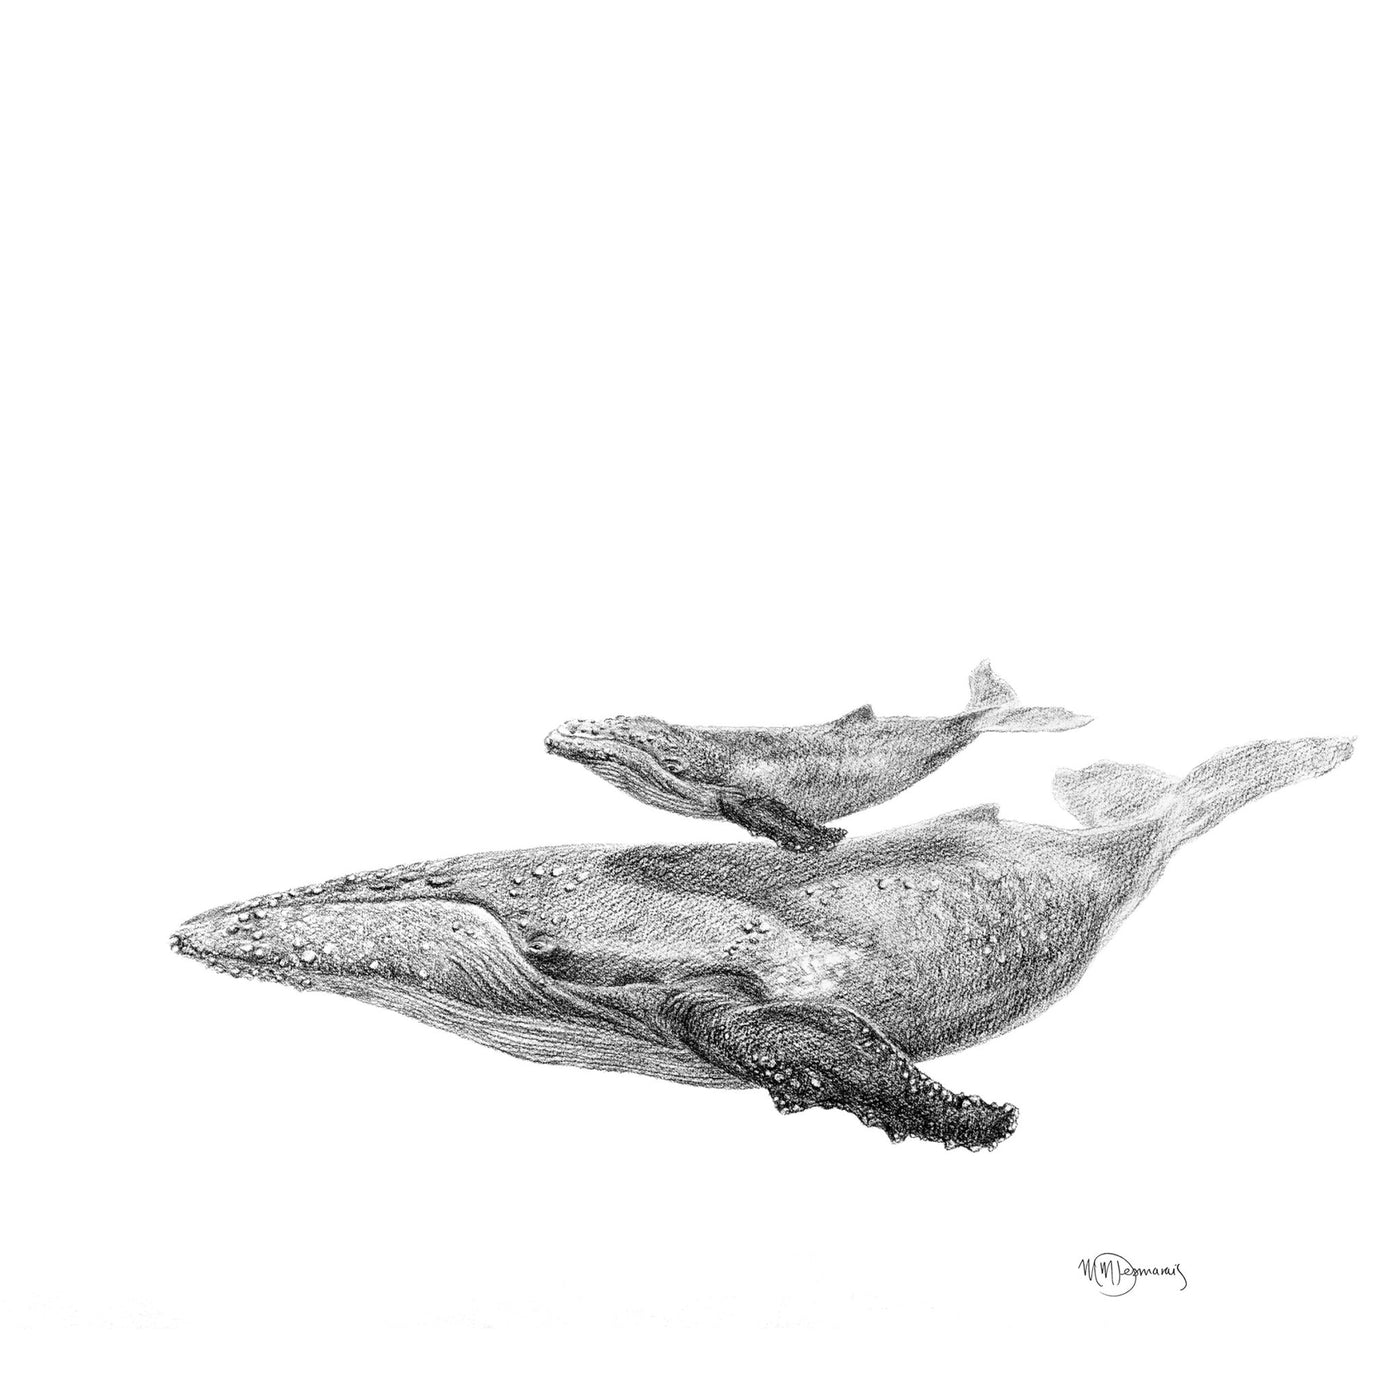 Whale with calf - illustration - LE NID atelier